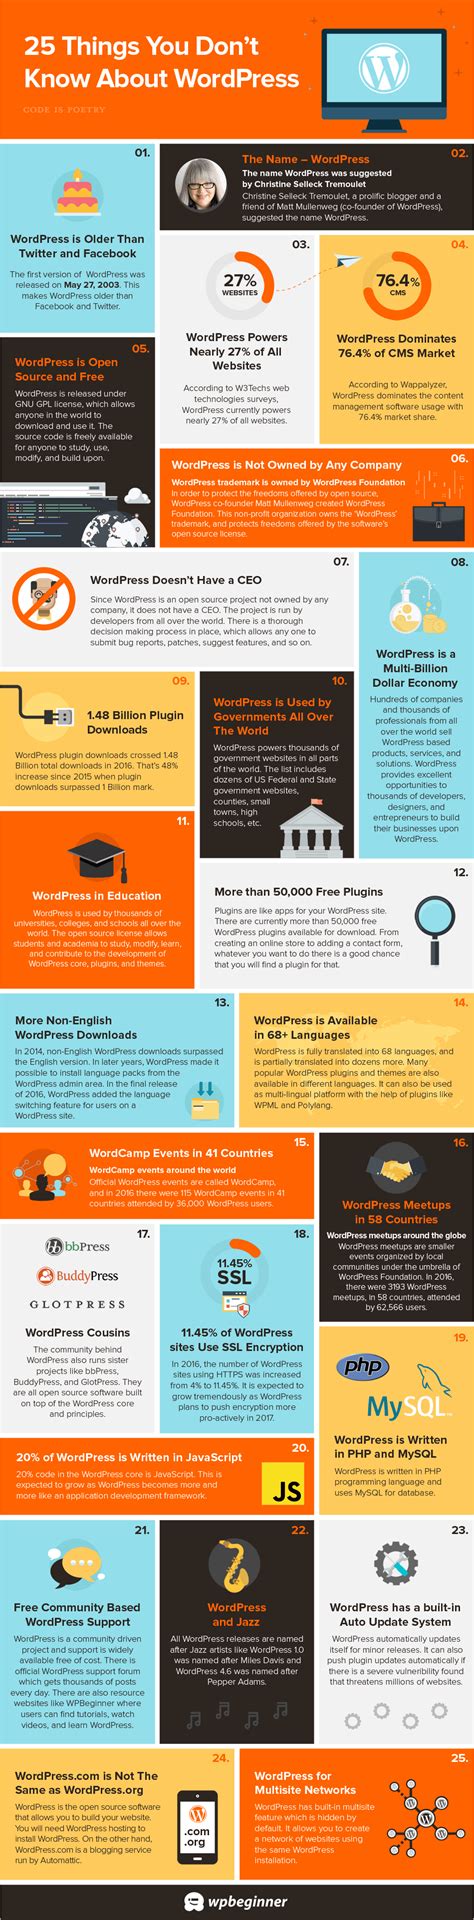 25 Interesting Facts About WordPress - #Infographic / Digital ...